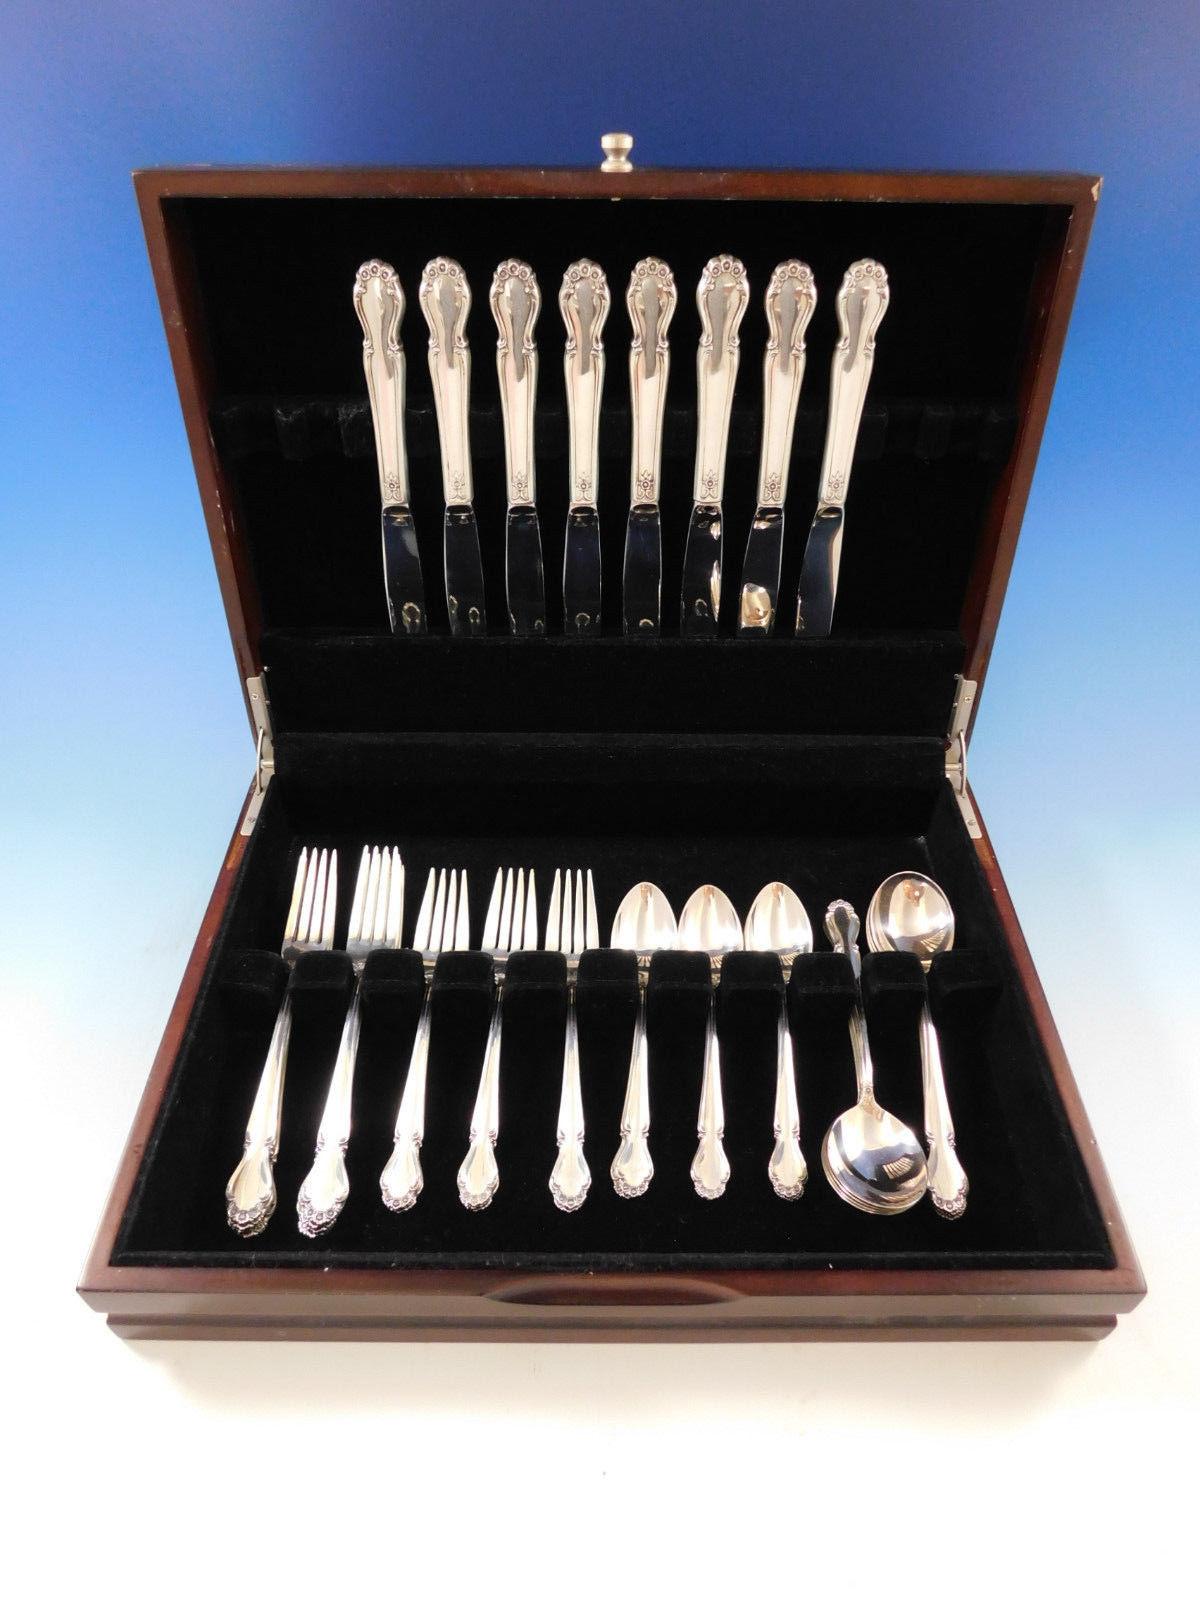 Exquisite wedding bells by International sterling silver flatware set - 40 pieces. This set includes:

Eight knives, 9